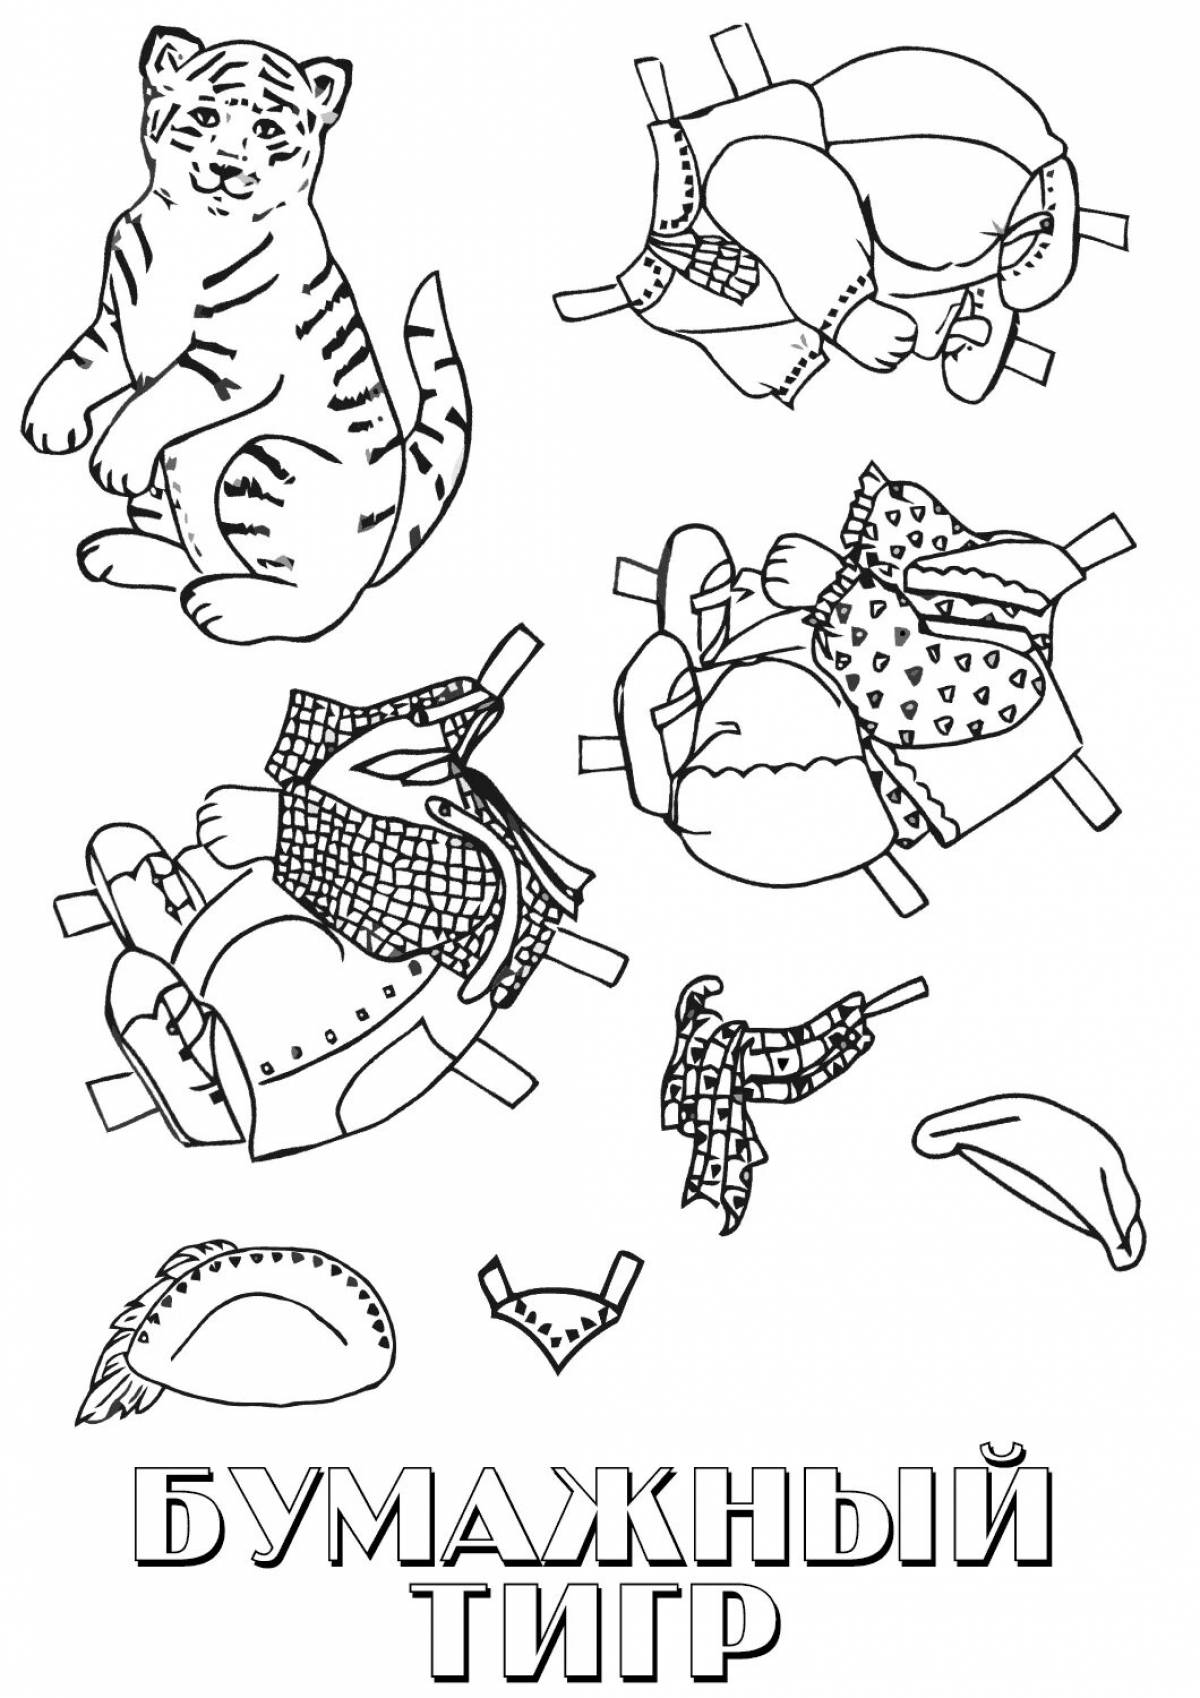 Fun animal coloring pages with clothes